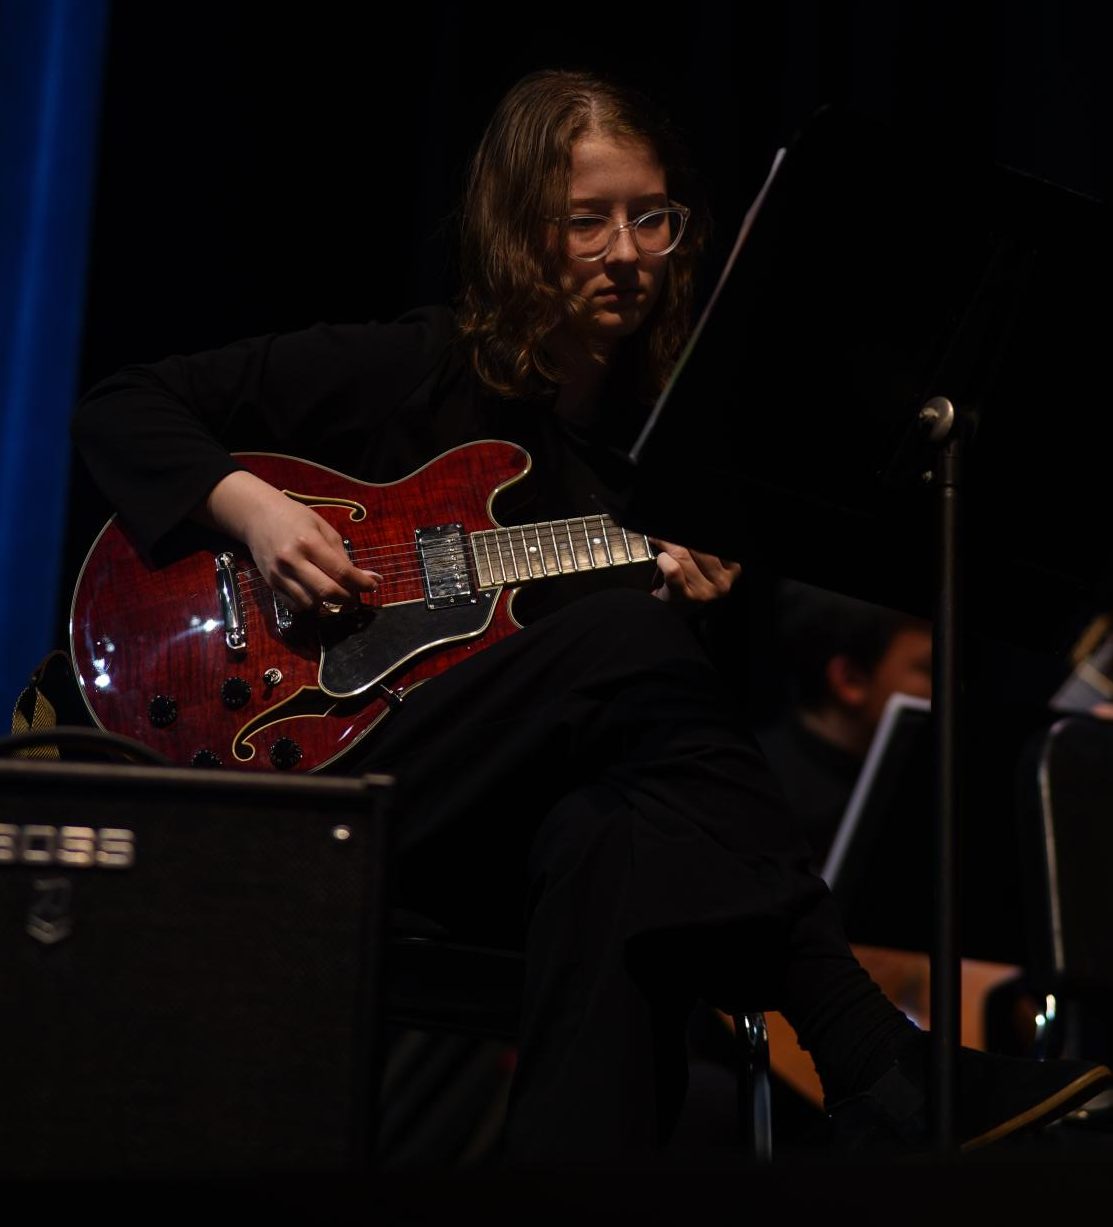 Meredith Grotevant performs at the final spring Guitar Concert in the McCallum Arts Center on May 16.